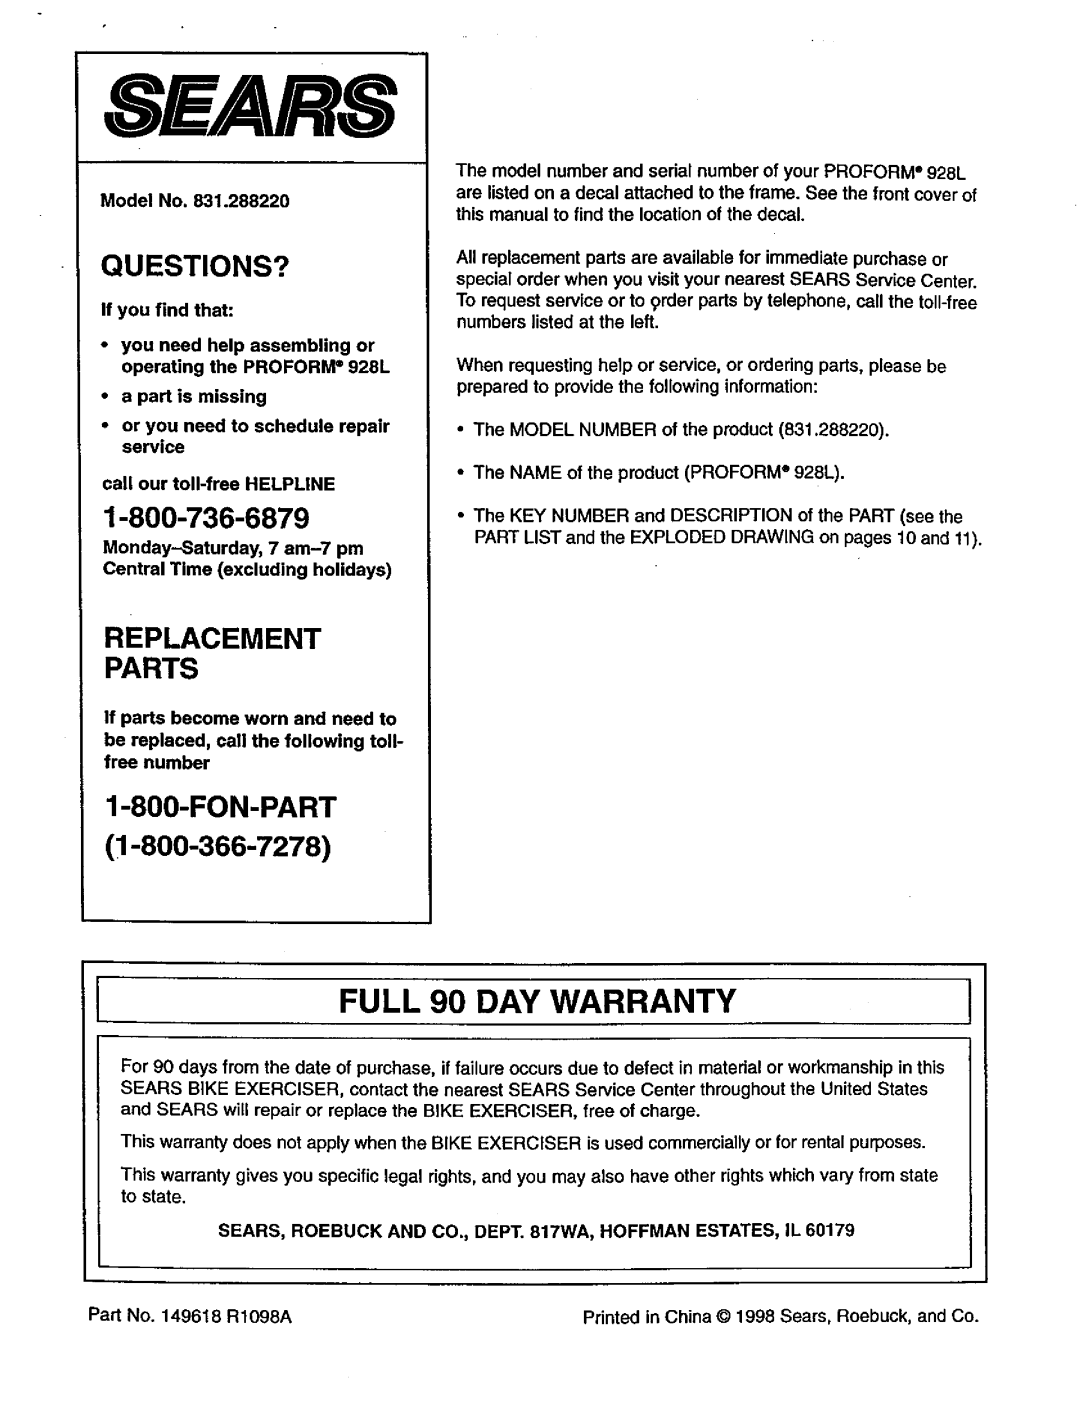 Sears 831.28822 user manual FULL 90 DAY WARRANTY, Questions?, Fon-Part, S£Aurs, Replacement Parts 